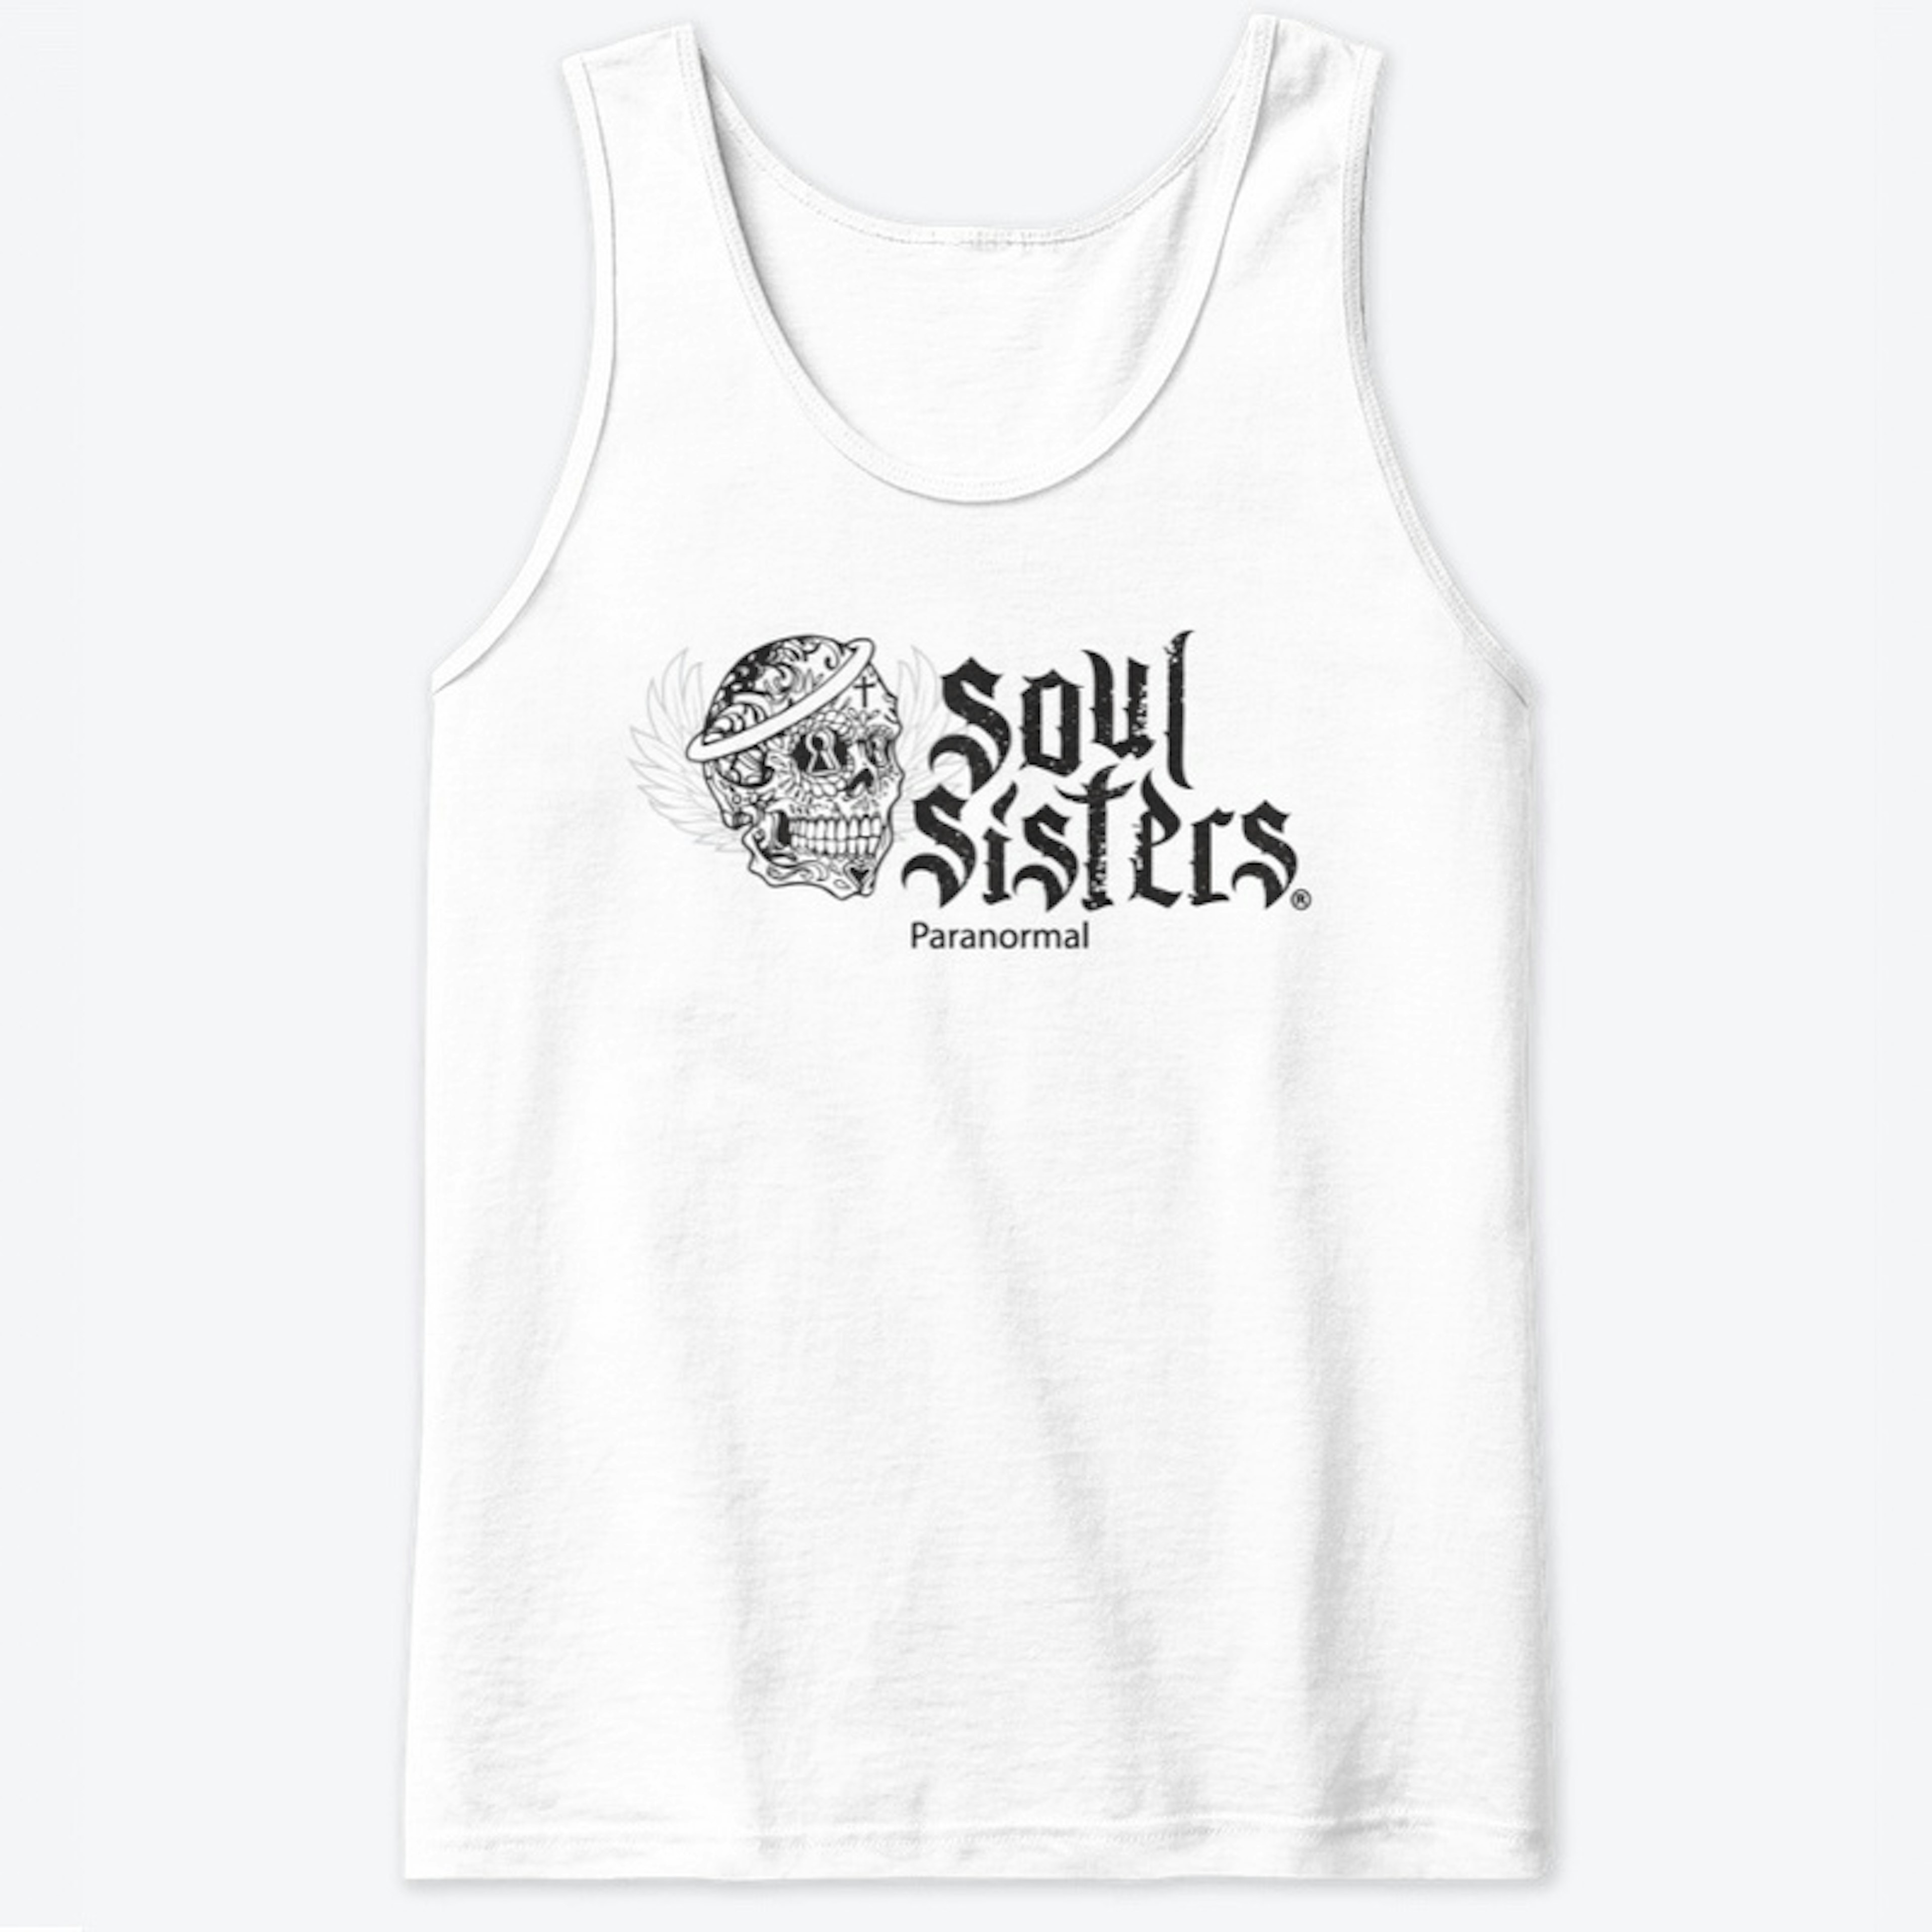 Soul Sisters Paranormal - white tank 